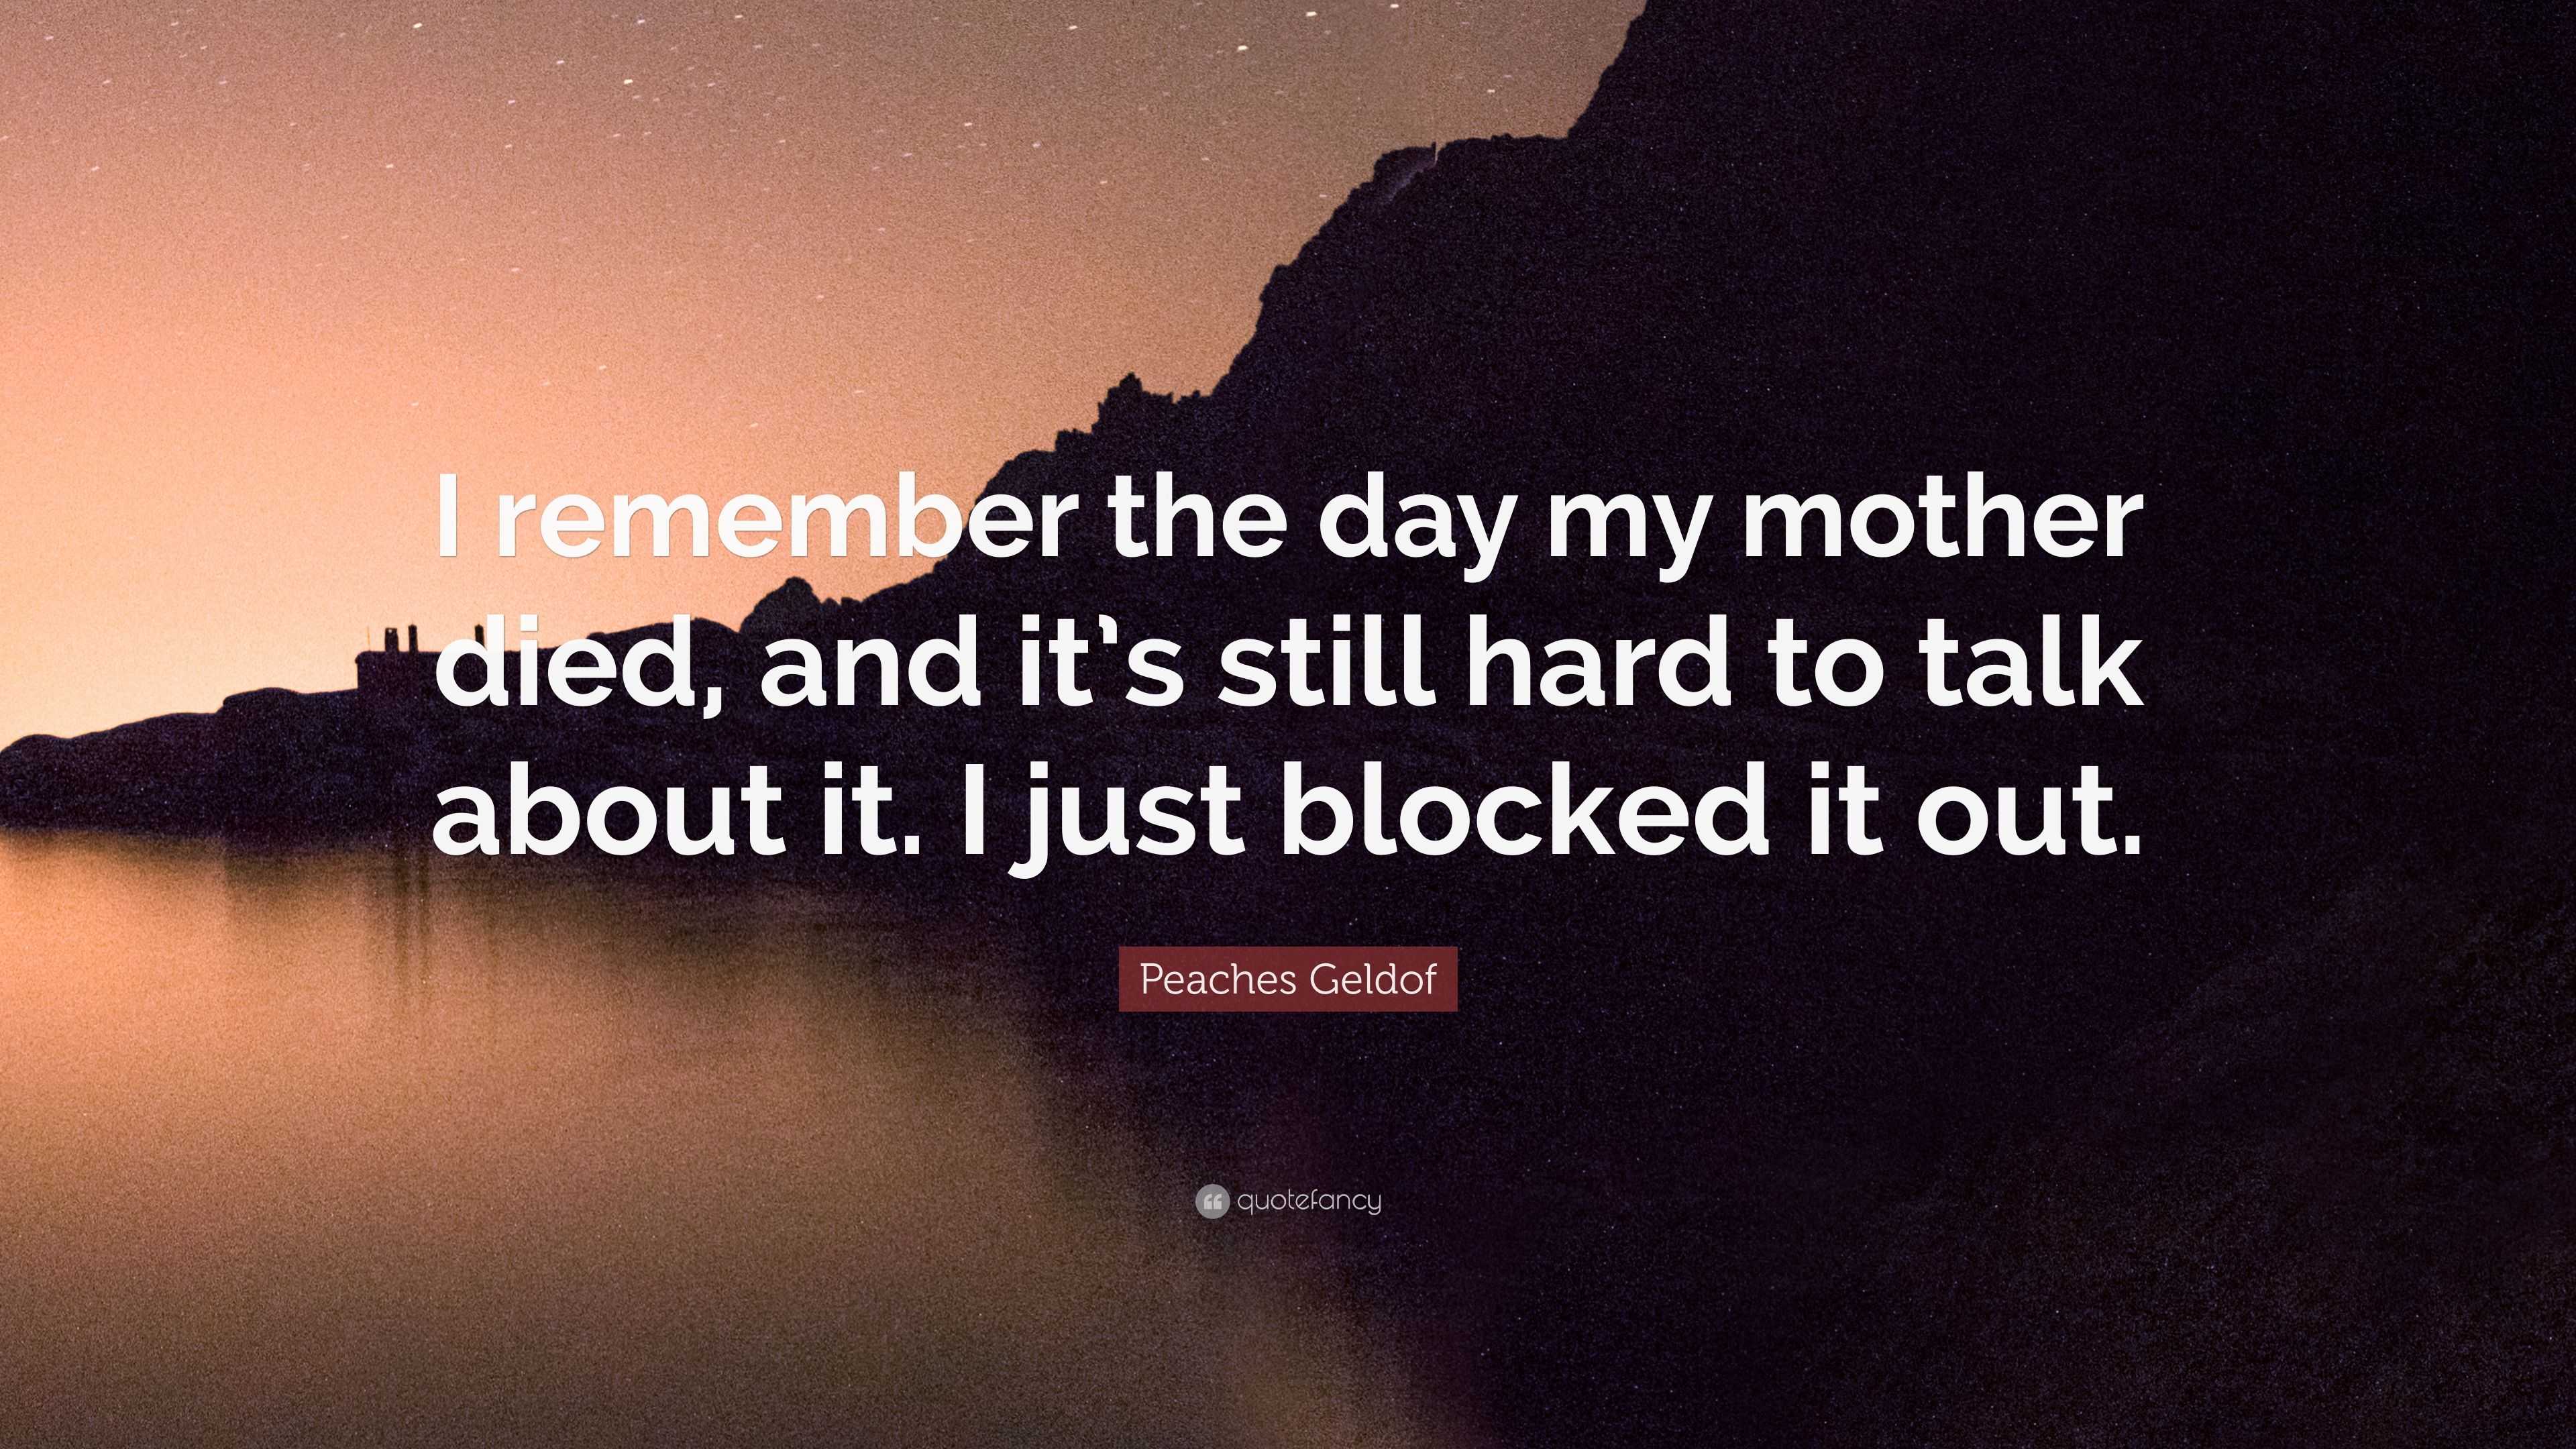 Peaches Geldof Quote: “I remember the day my mother died, and it’s ...